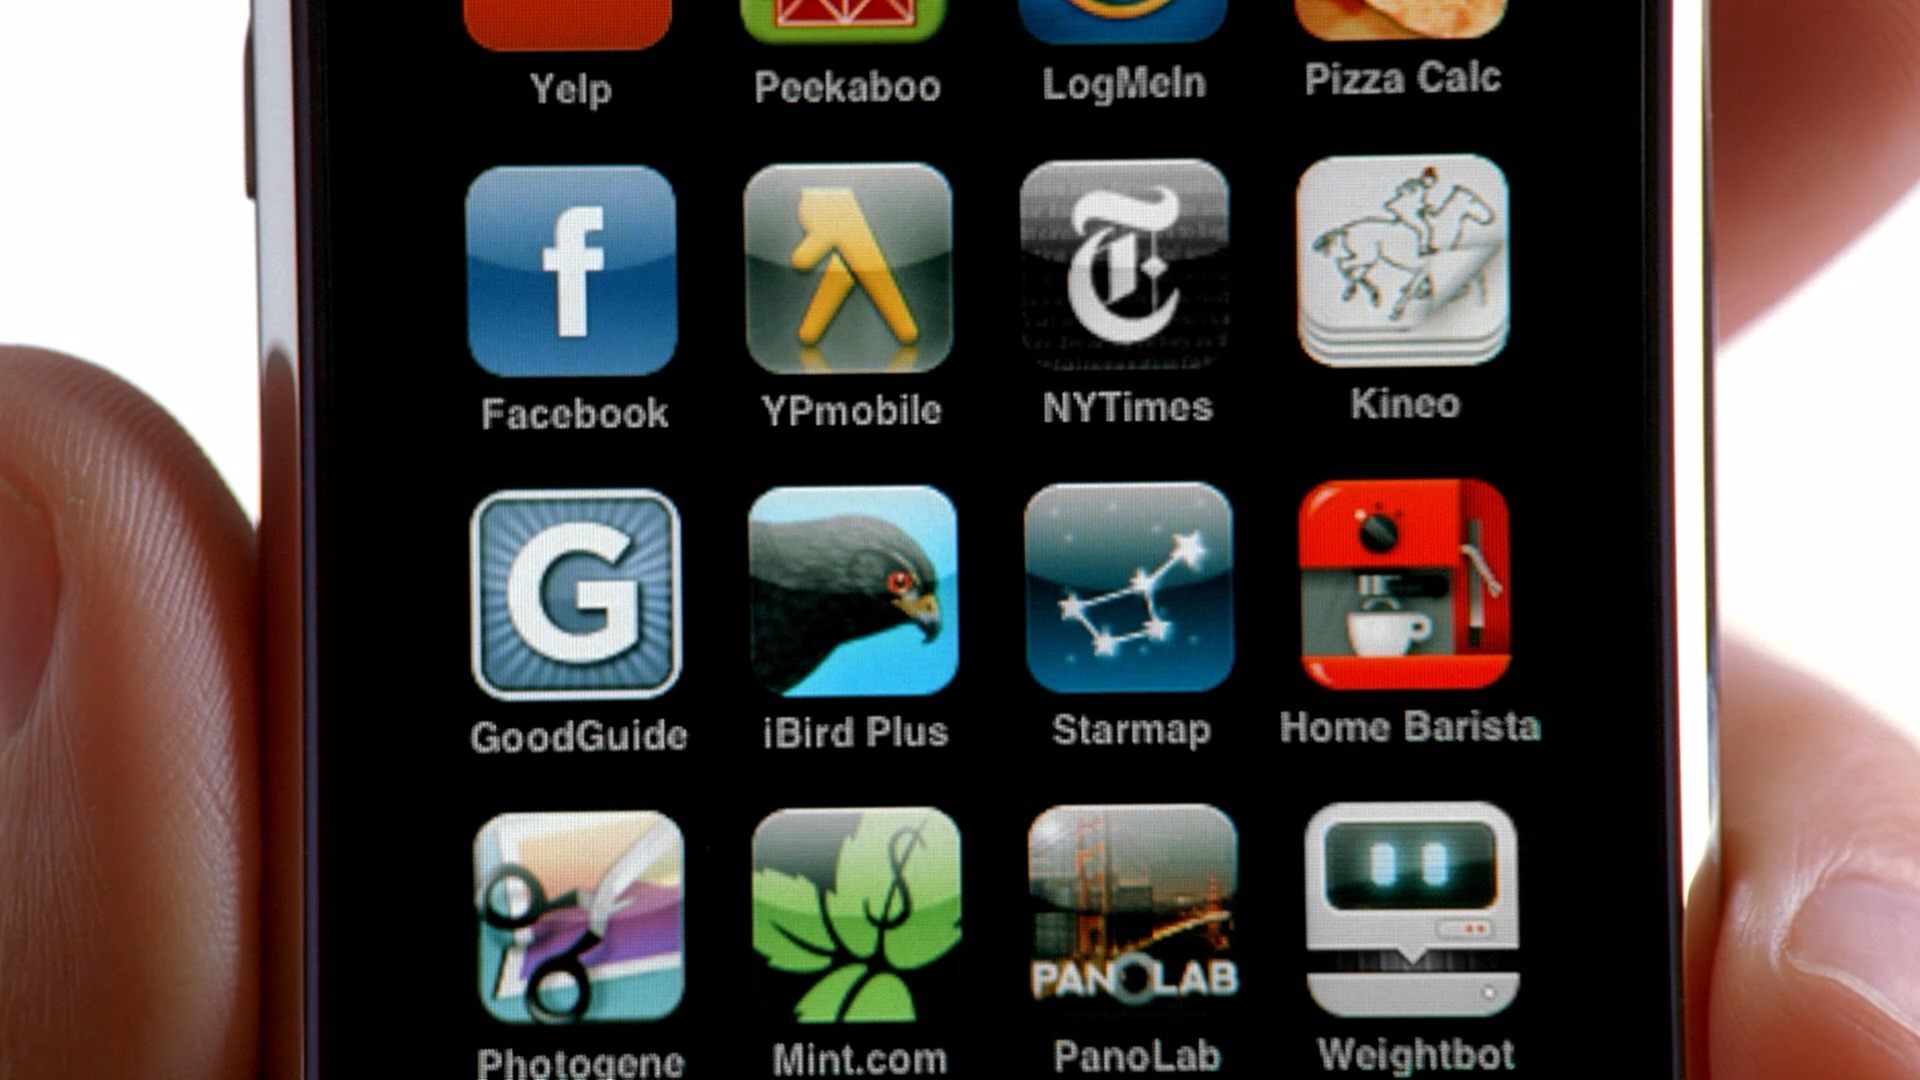 A still from an Apple ad, showing Kineo's app icon.